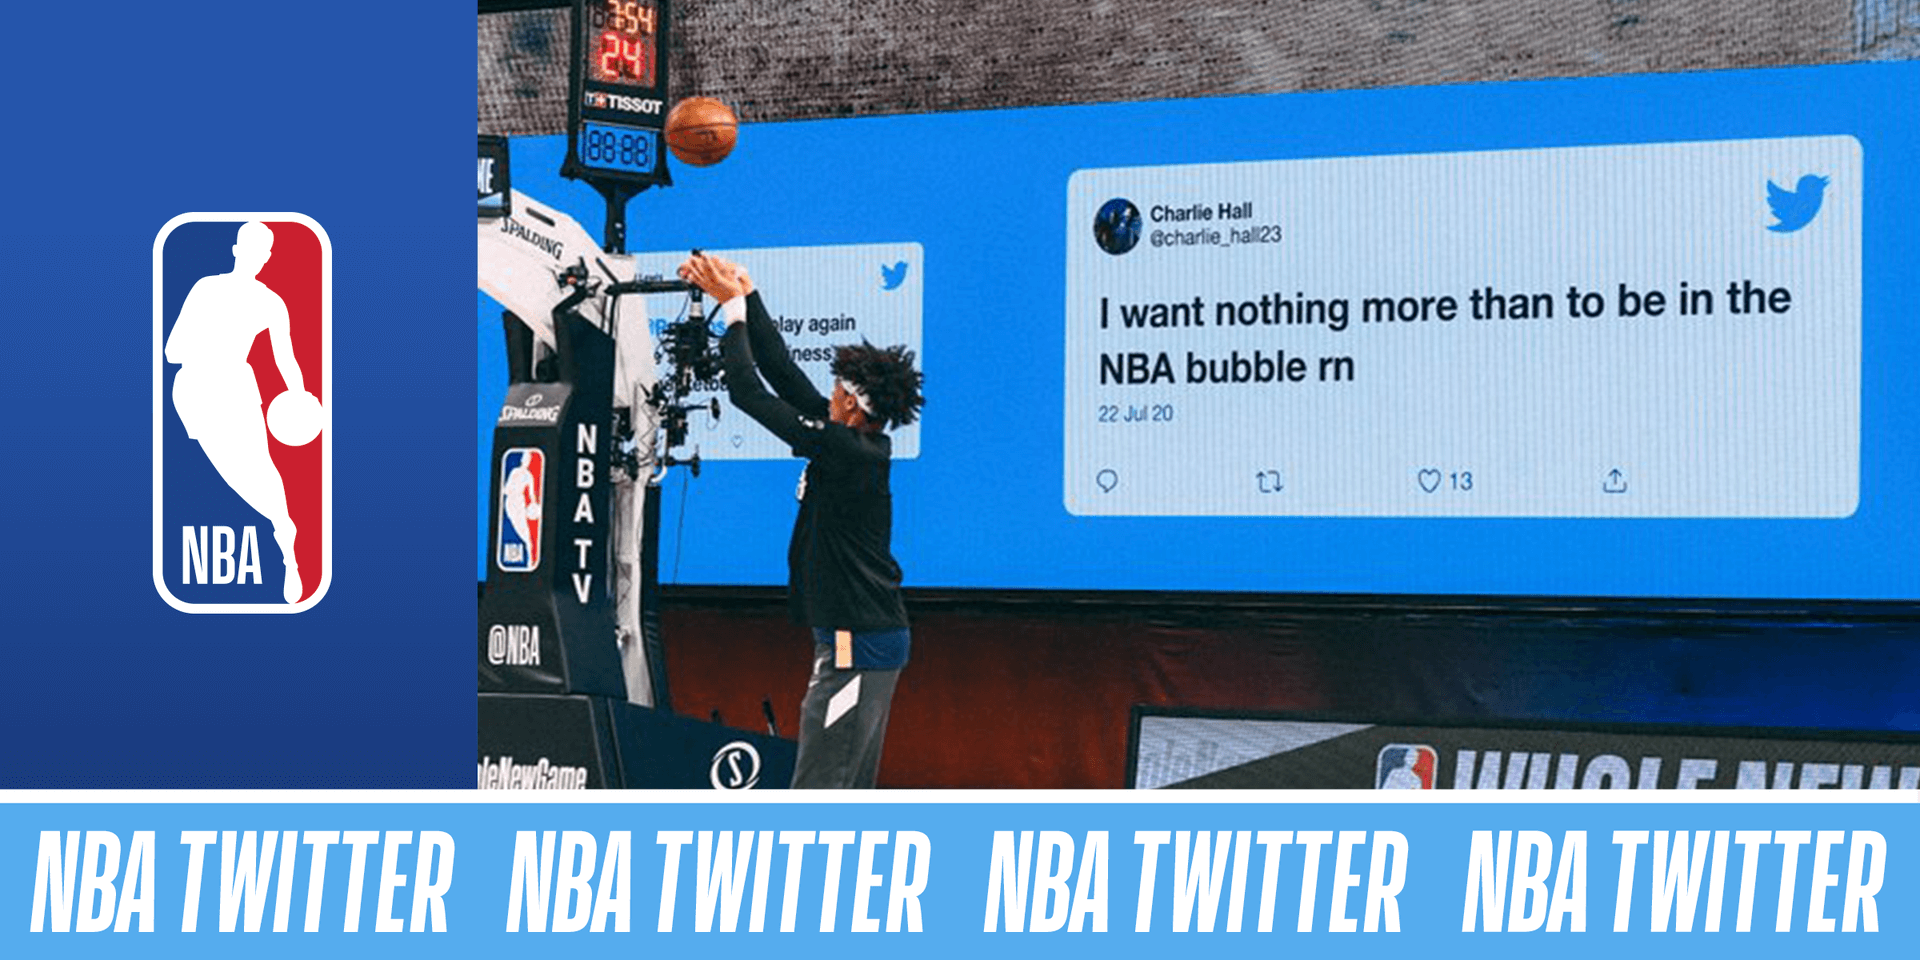 @NBA Twitter - From Orlando to Twitter